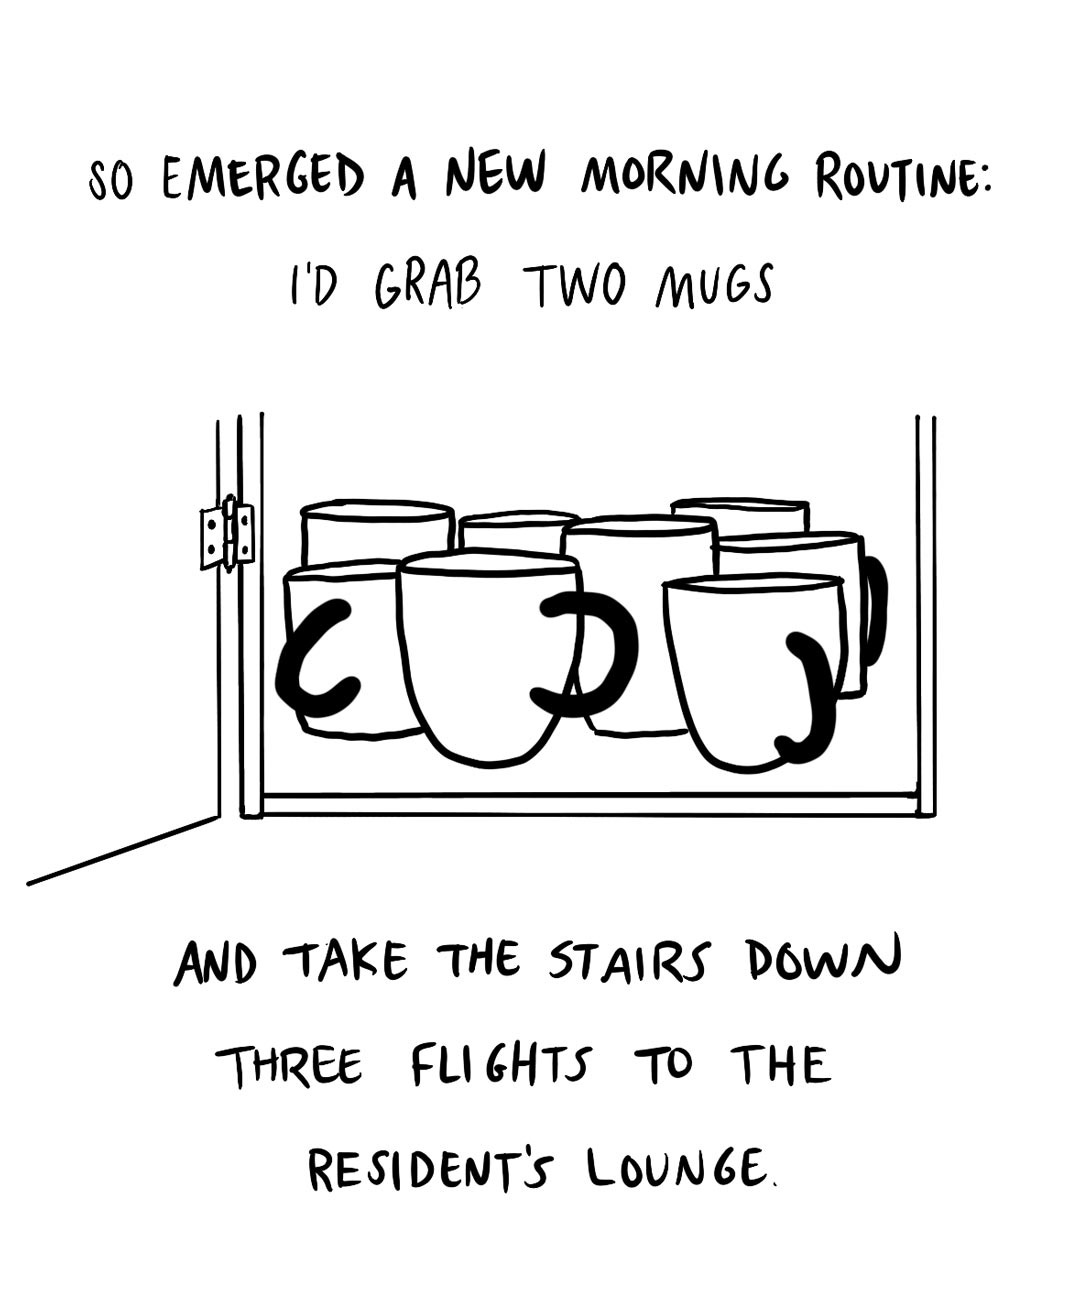 So emerged a new morning routine: I’d grab two mugs and take the stairs down three flights to the residents lounge.